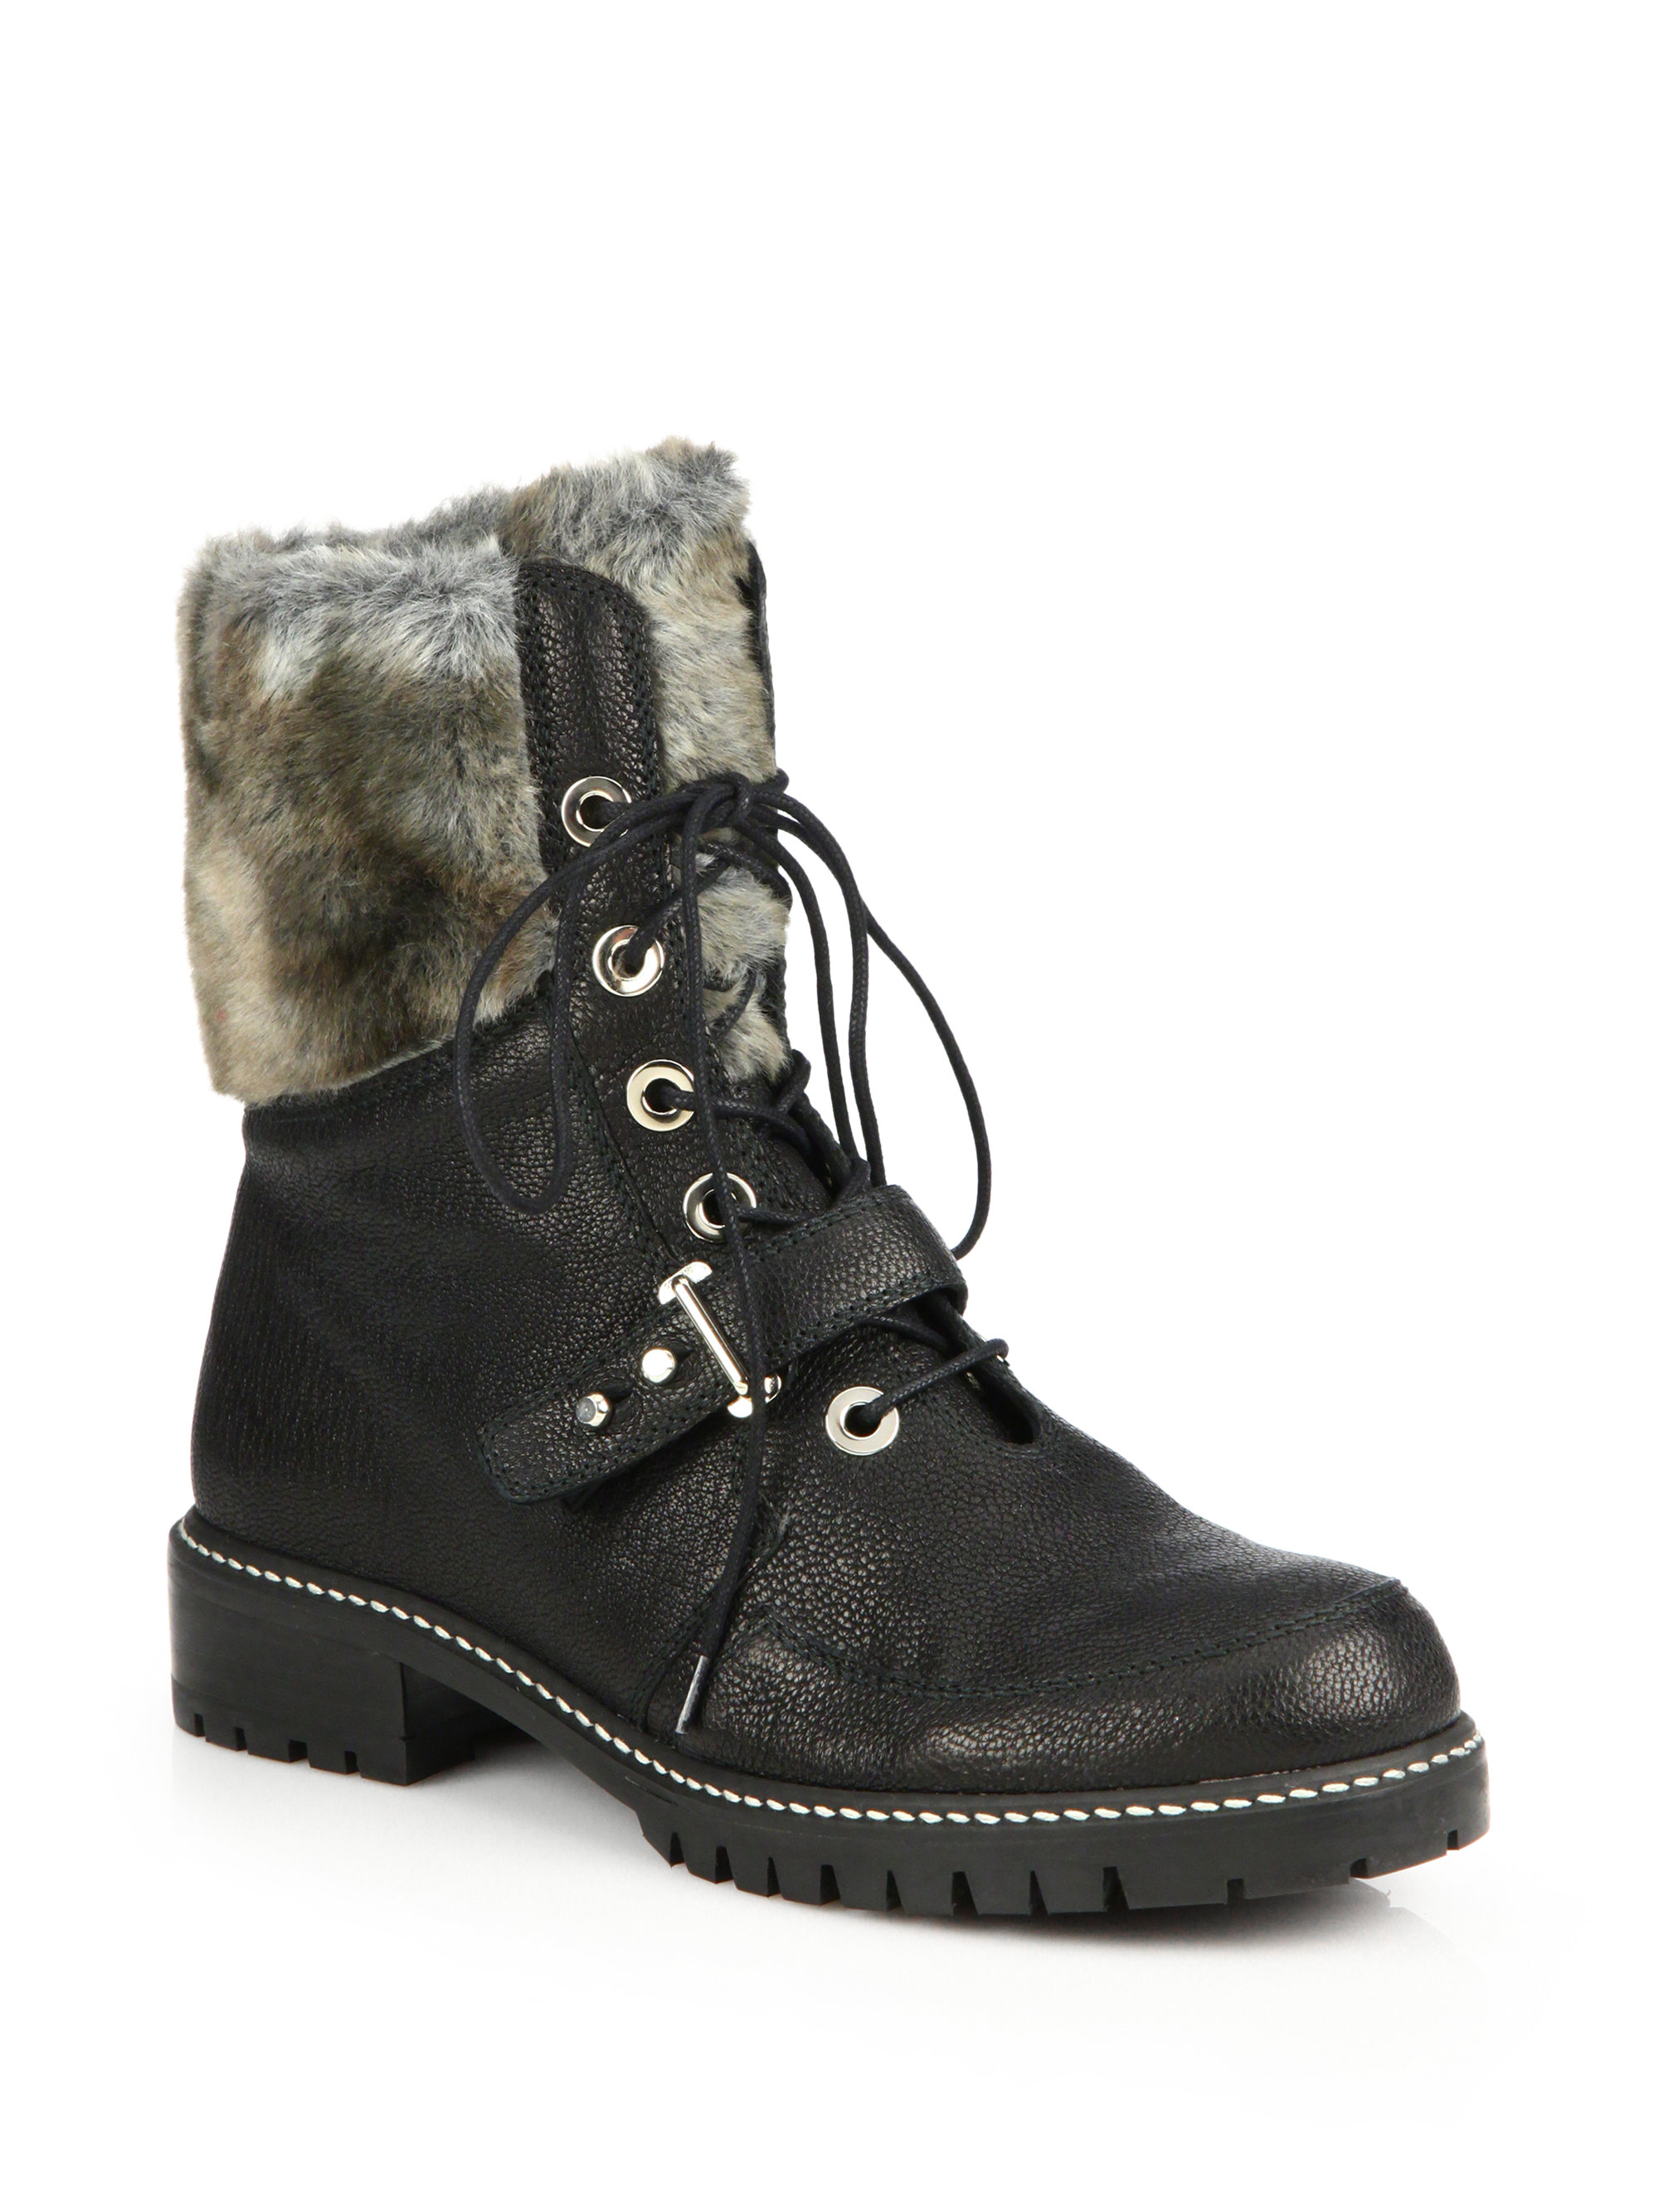 Stuart weitzman Viking Leather & Faux Fur Lace-up Boots in Black | Lyst